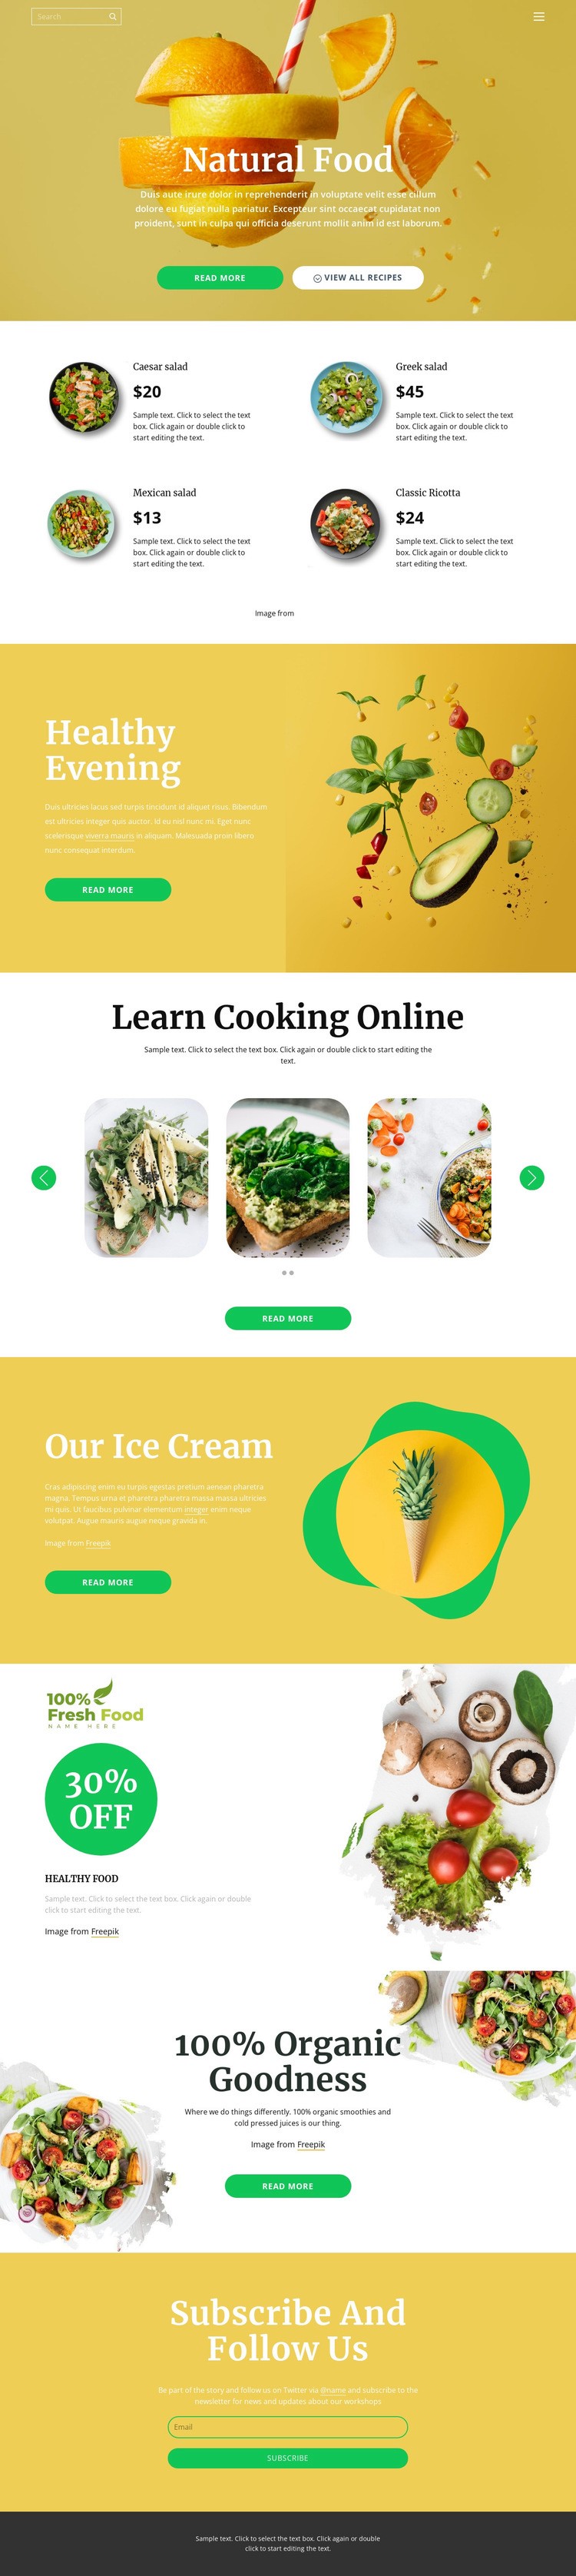 Delicious and healthy food Wix Template Alternative